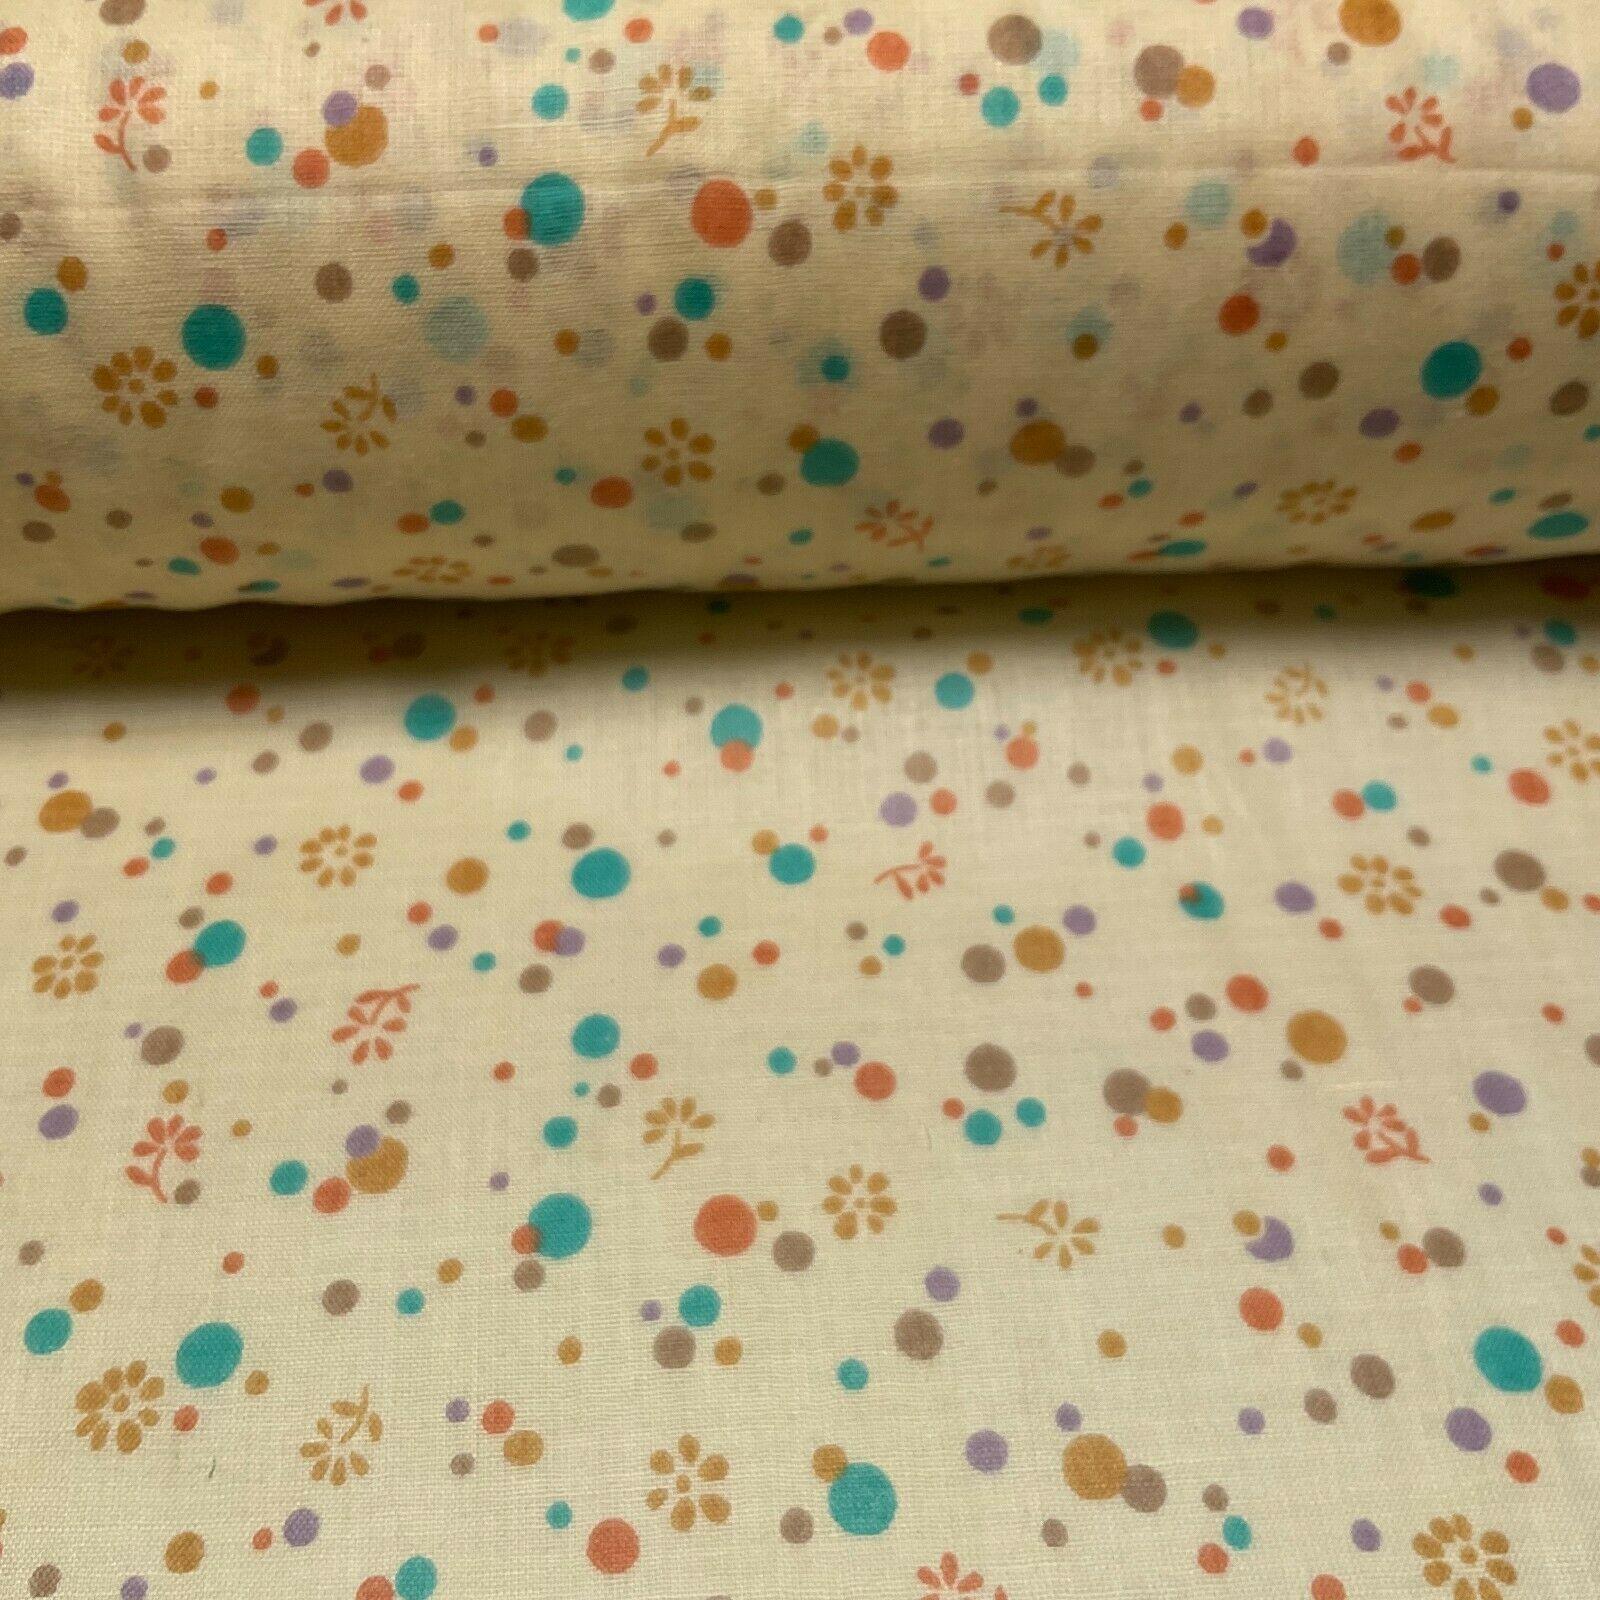 Cotton Lawn Summer small Floral dot Printed Dress fabric 111cm wide M1595